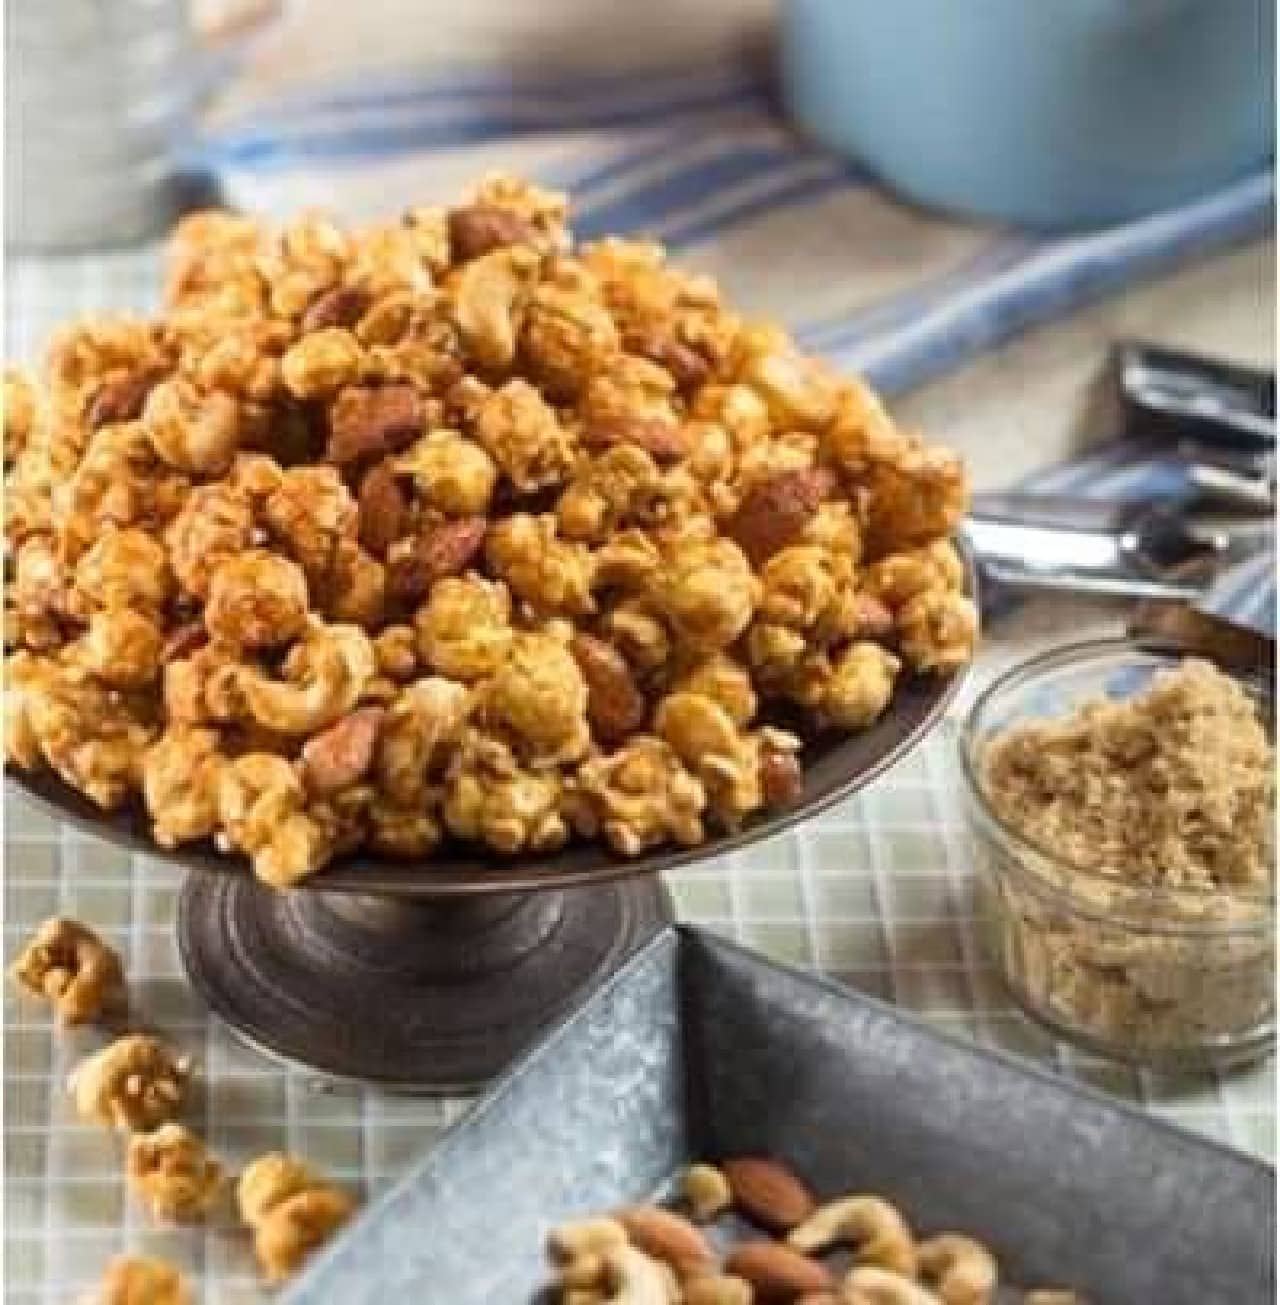 "Triple Nut Caramel Crisp" is a popcorn flavor that uses three types of nuts: almonds, cashew nuts, and walnuts.